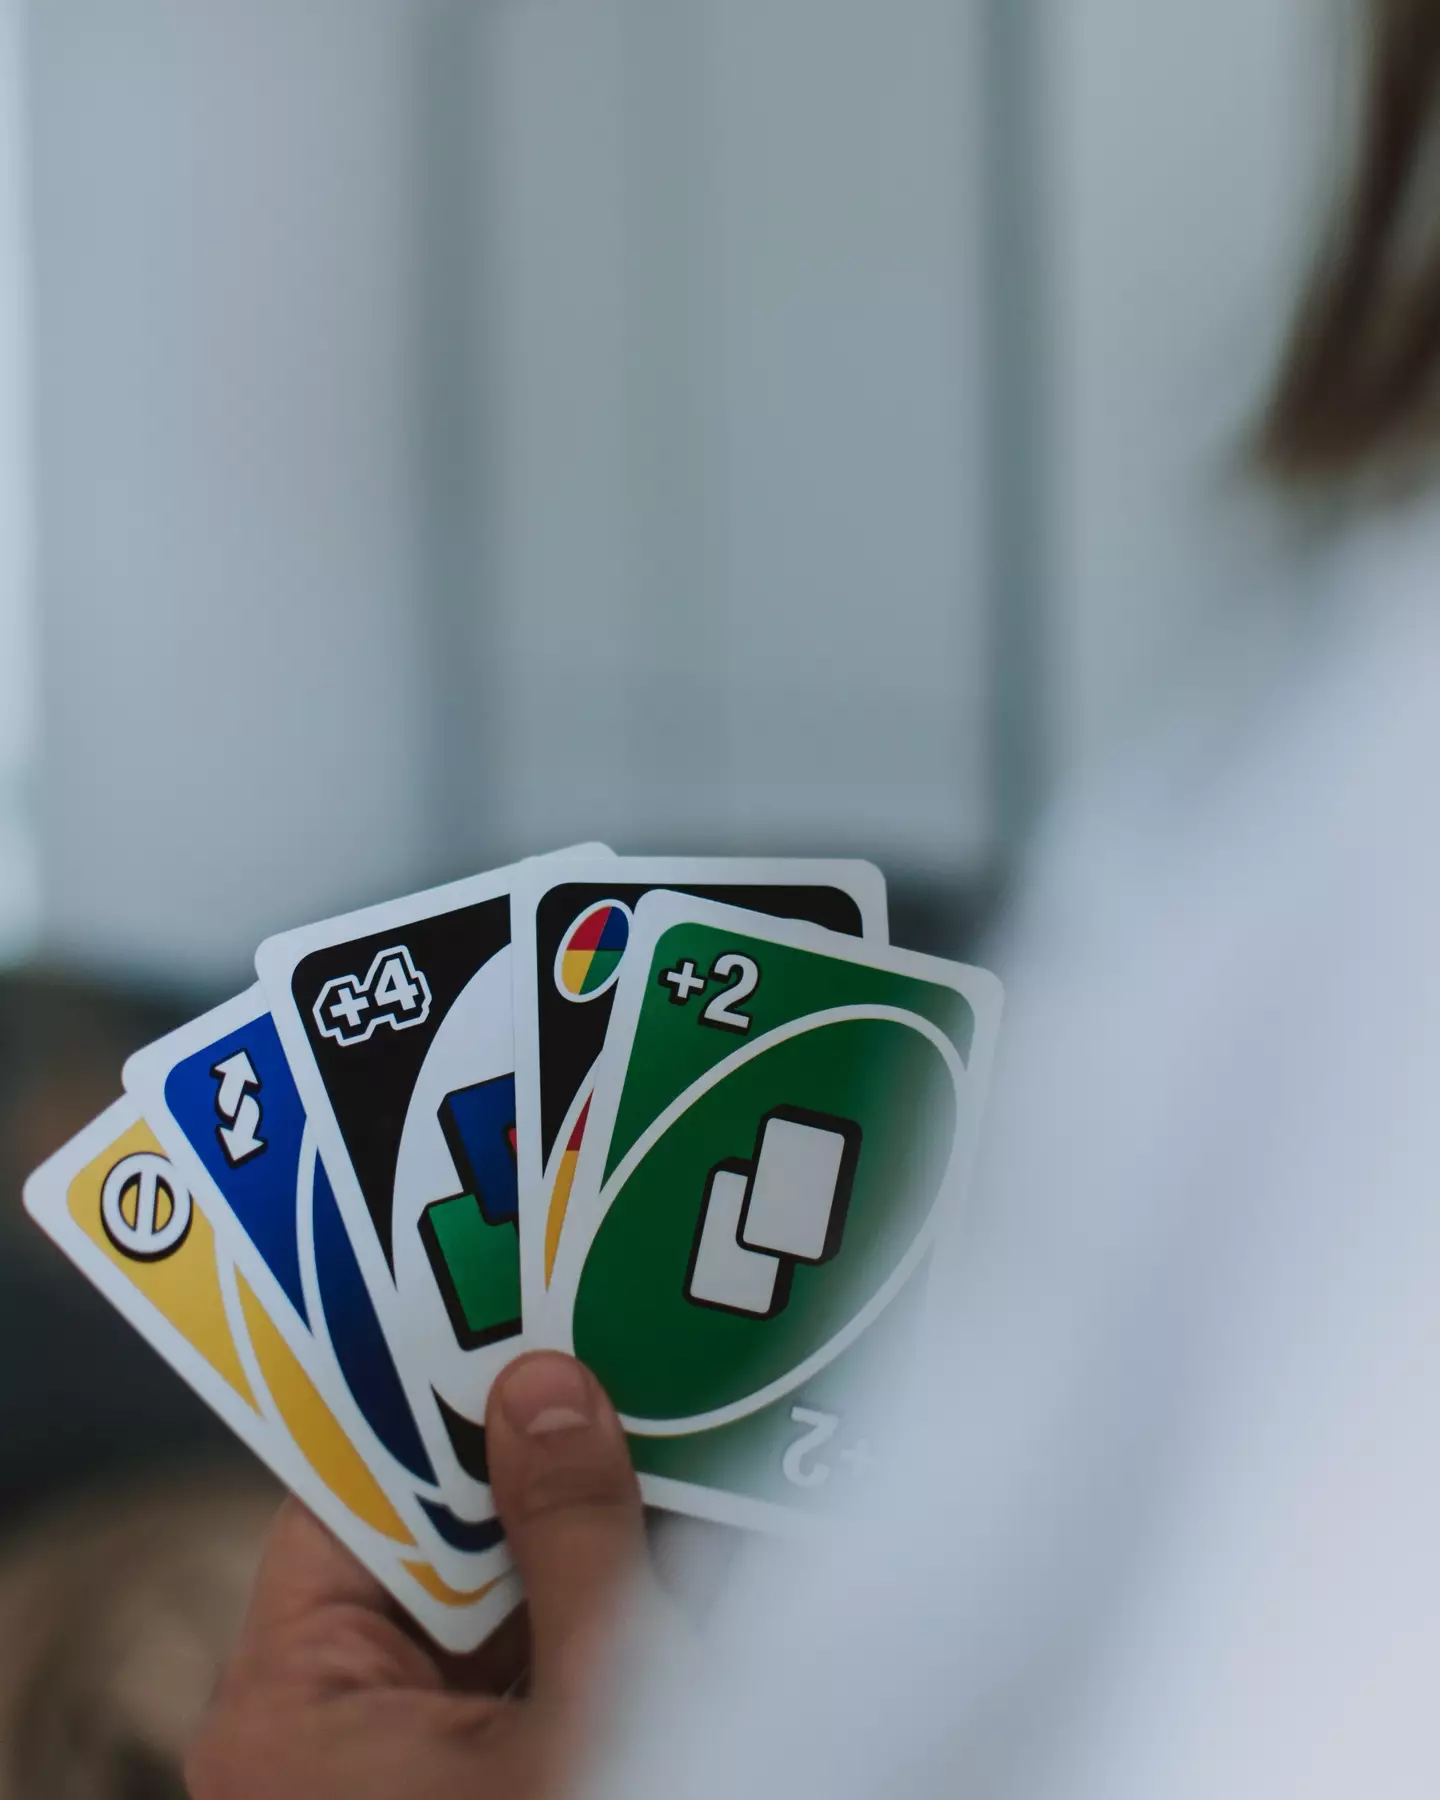 It's time to dust off your UNO cards and get practising.